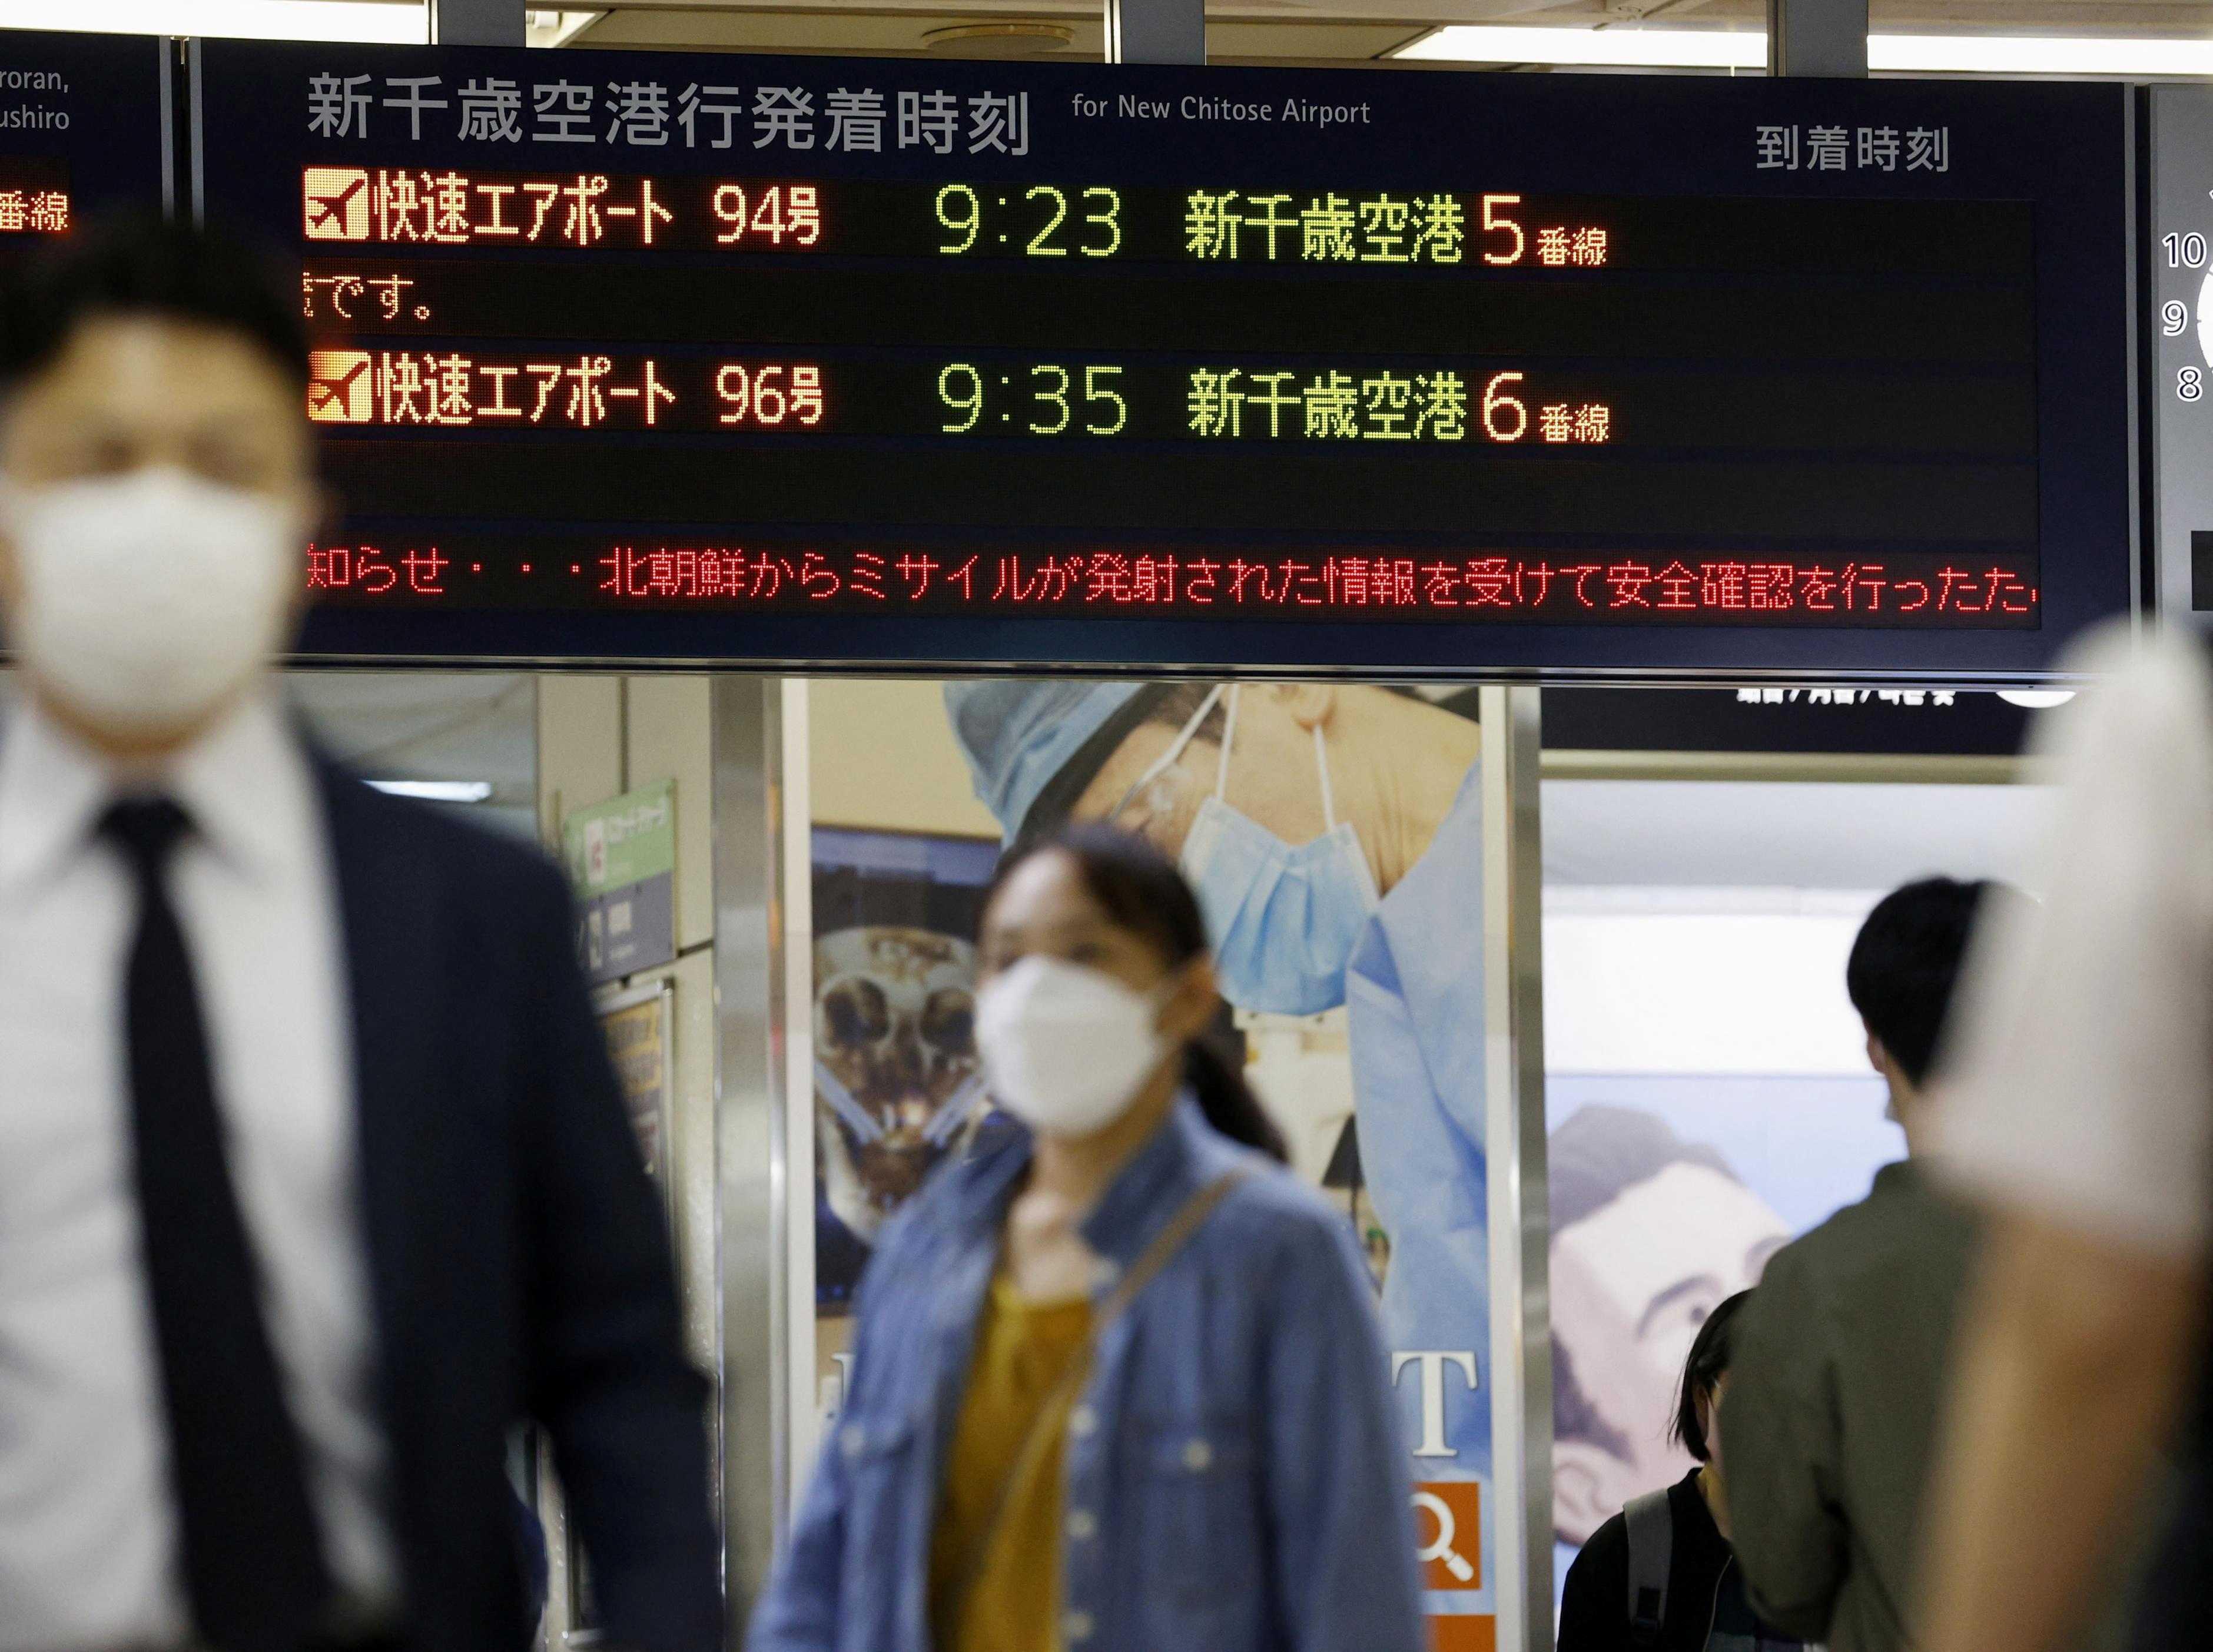 An electric board informing disruptions of the train schedules due to North Korea's missile launch is seen at Sapporo Station in Sapporo on Japan's northern island of Hokkaido, Oct 4, in this photo taken by Kyodo. Photo: AFP 